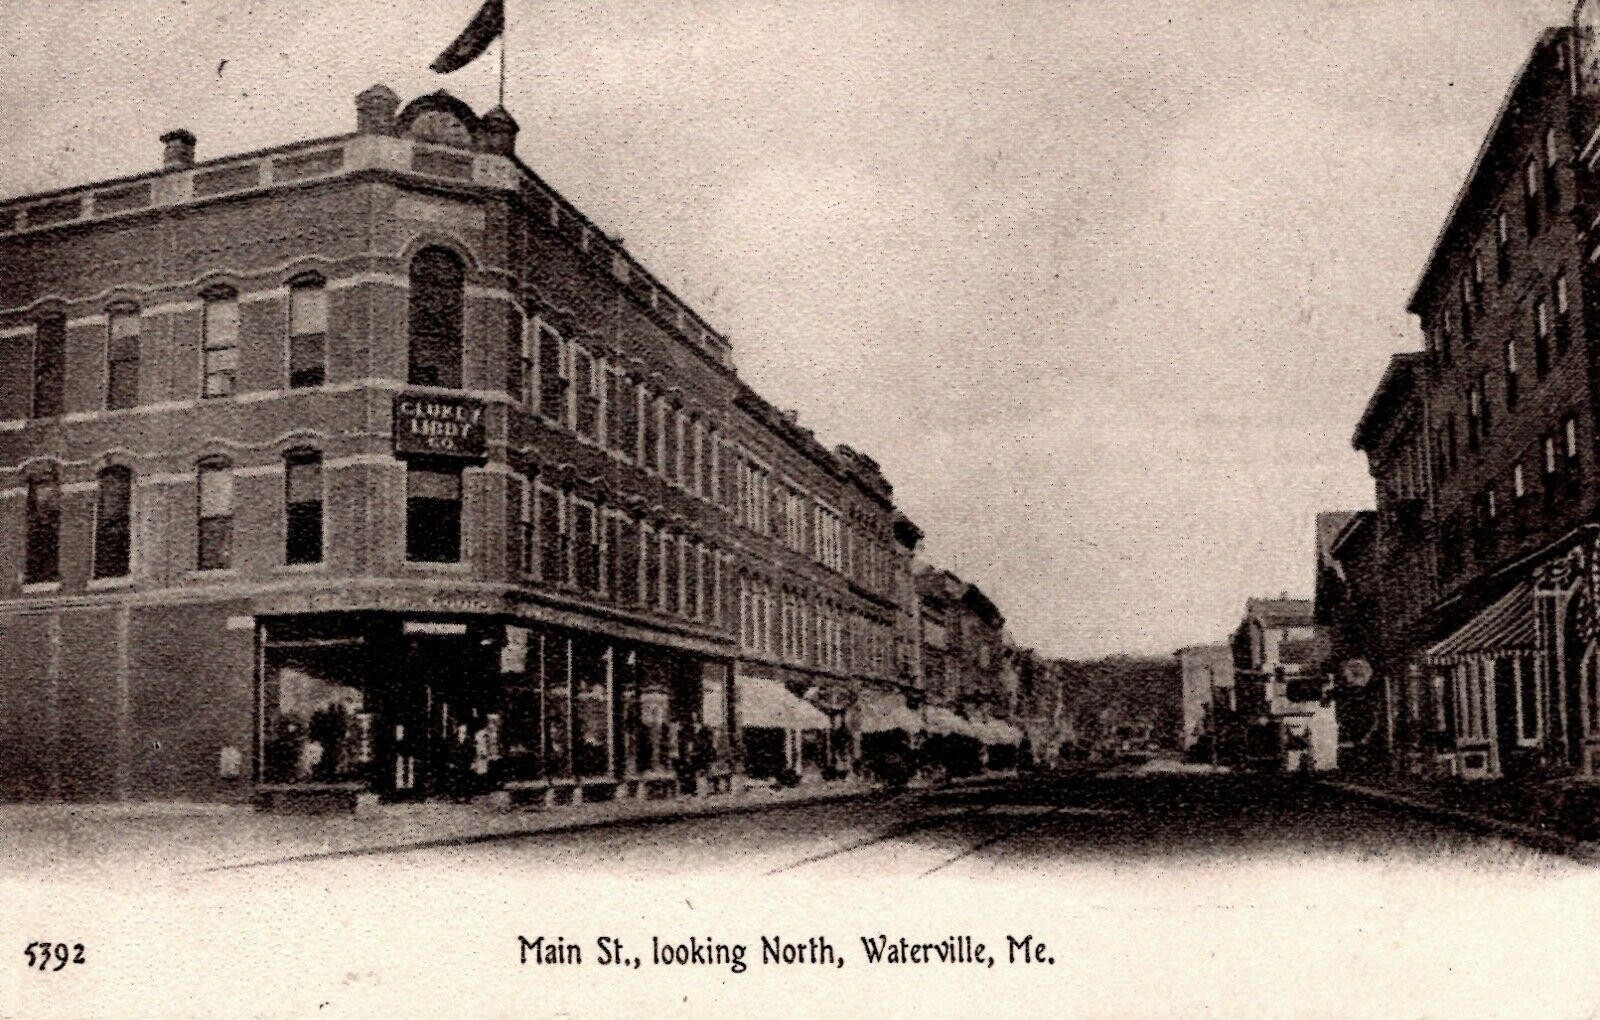 Waterville, Maine - Shop downtown on Main Street - c1908